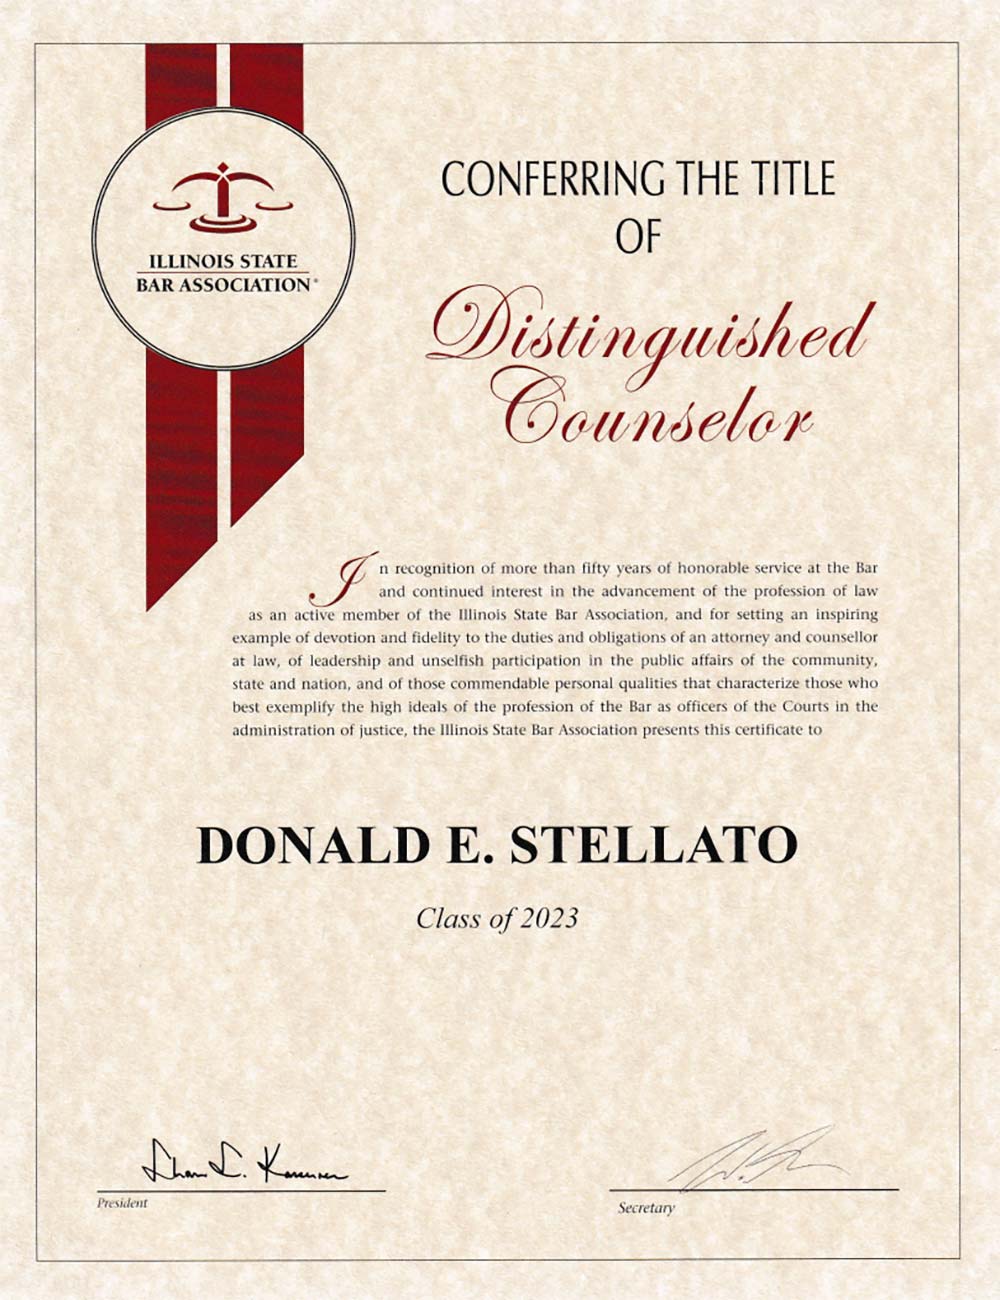 Mr. Stellato recognized as a Distinguished Counselor by the Illinois State Bar Association (ISBA)